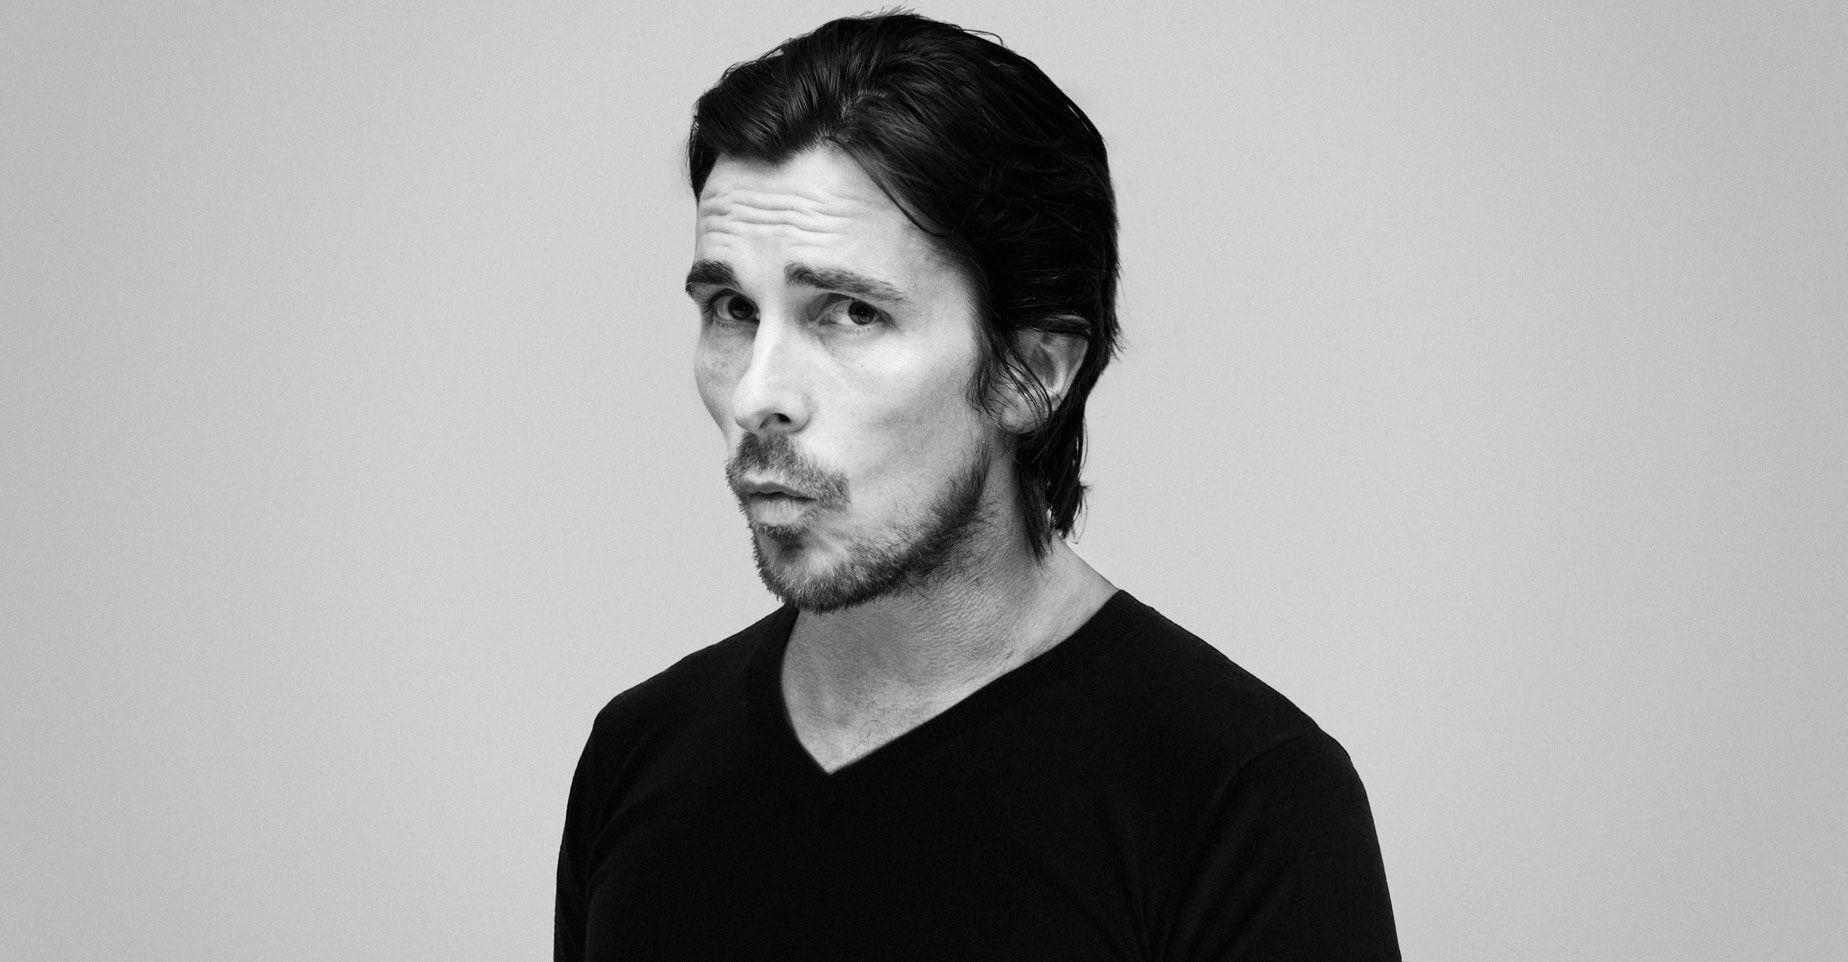 Christian Bale wallpaper HD background download Facebook Covers